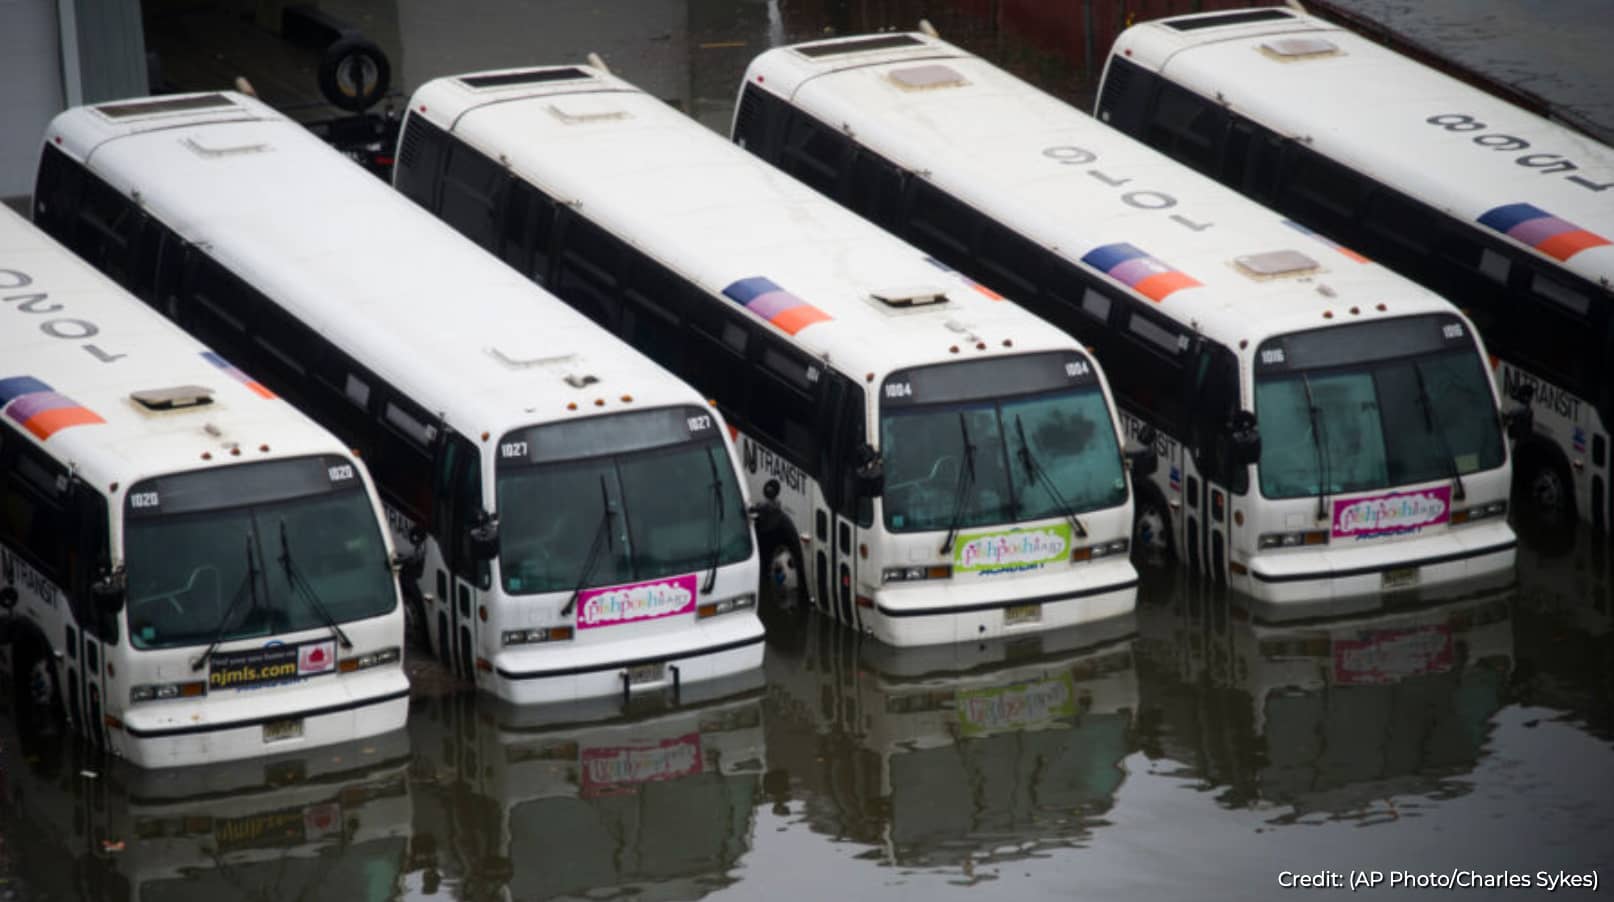 Give more money to NJ Transit to help in fight against climate change?